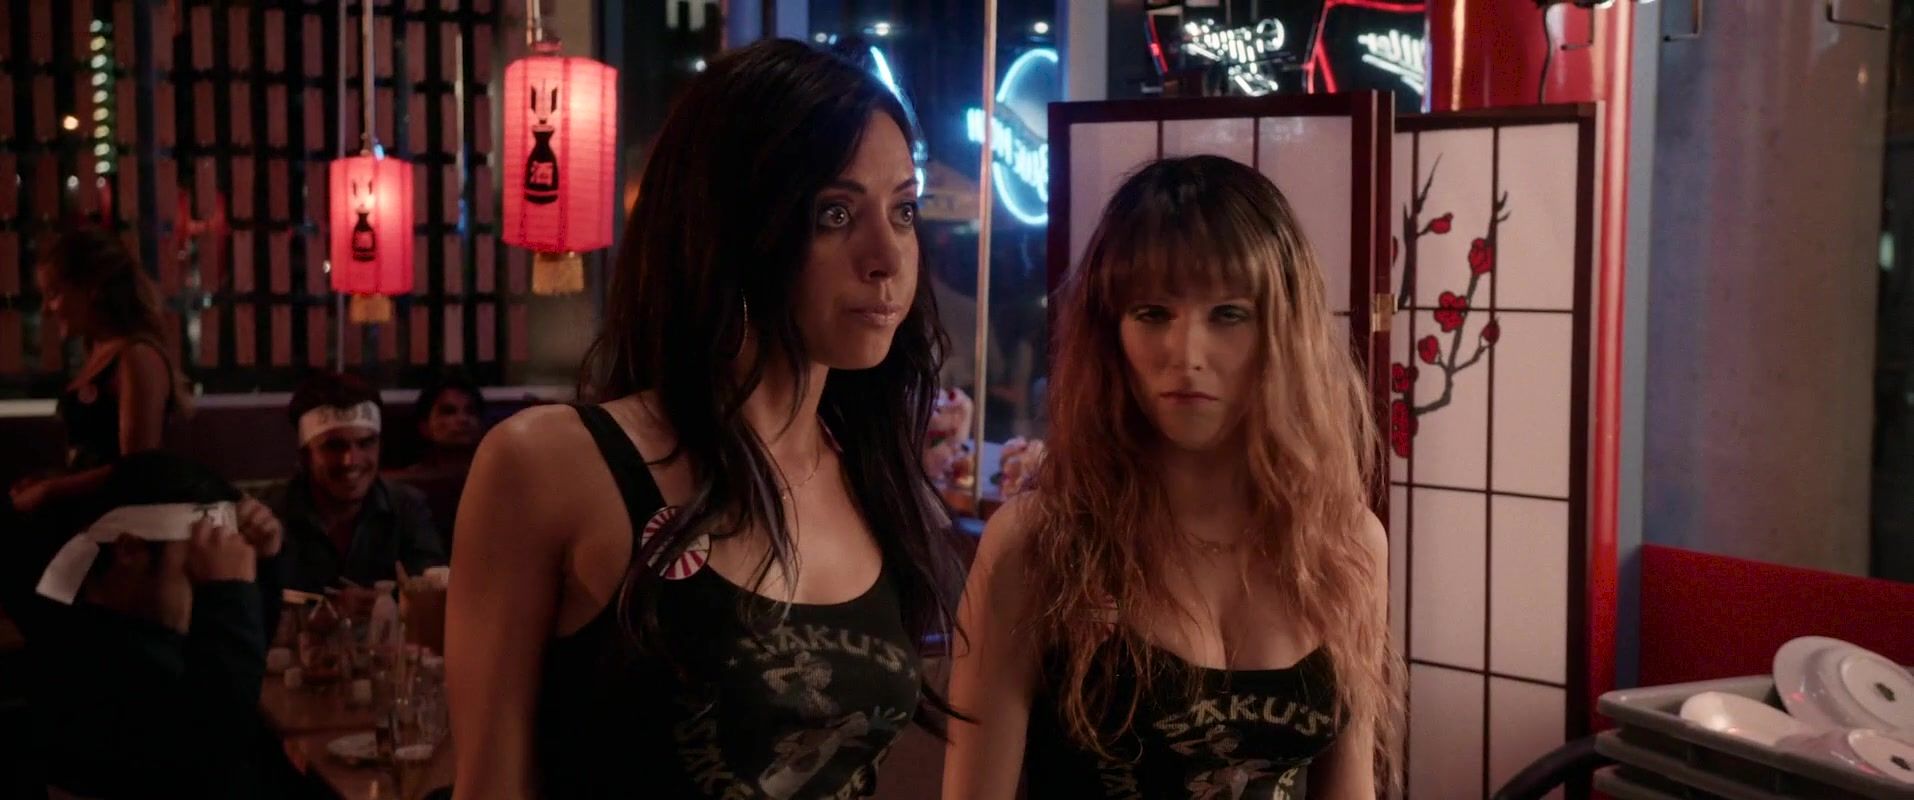 Qwertty Sugar Lyn Beard nude, Aubrey Plaza naked, Anna Kendrick and Alice Wetterlund - Mike & Dave Need Wedding Dates (2016) Couch - 1